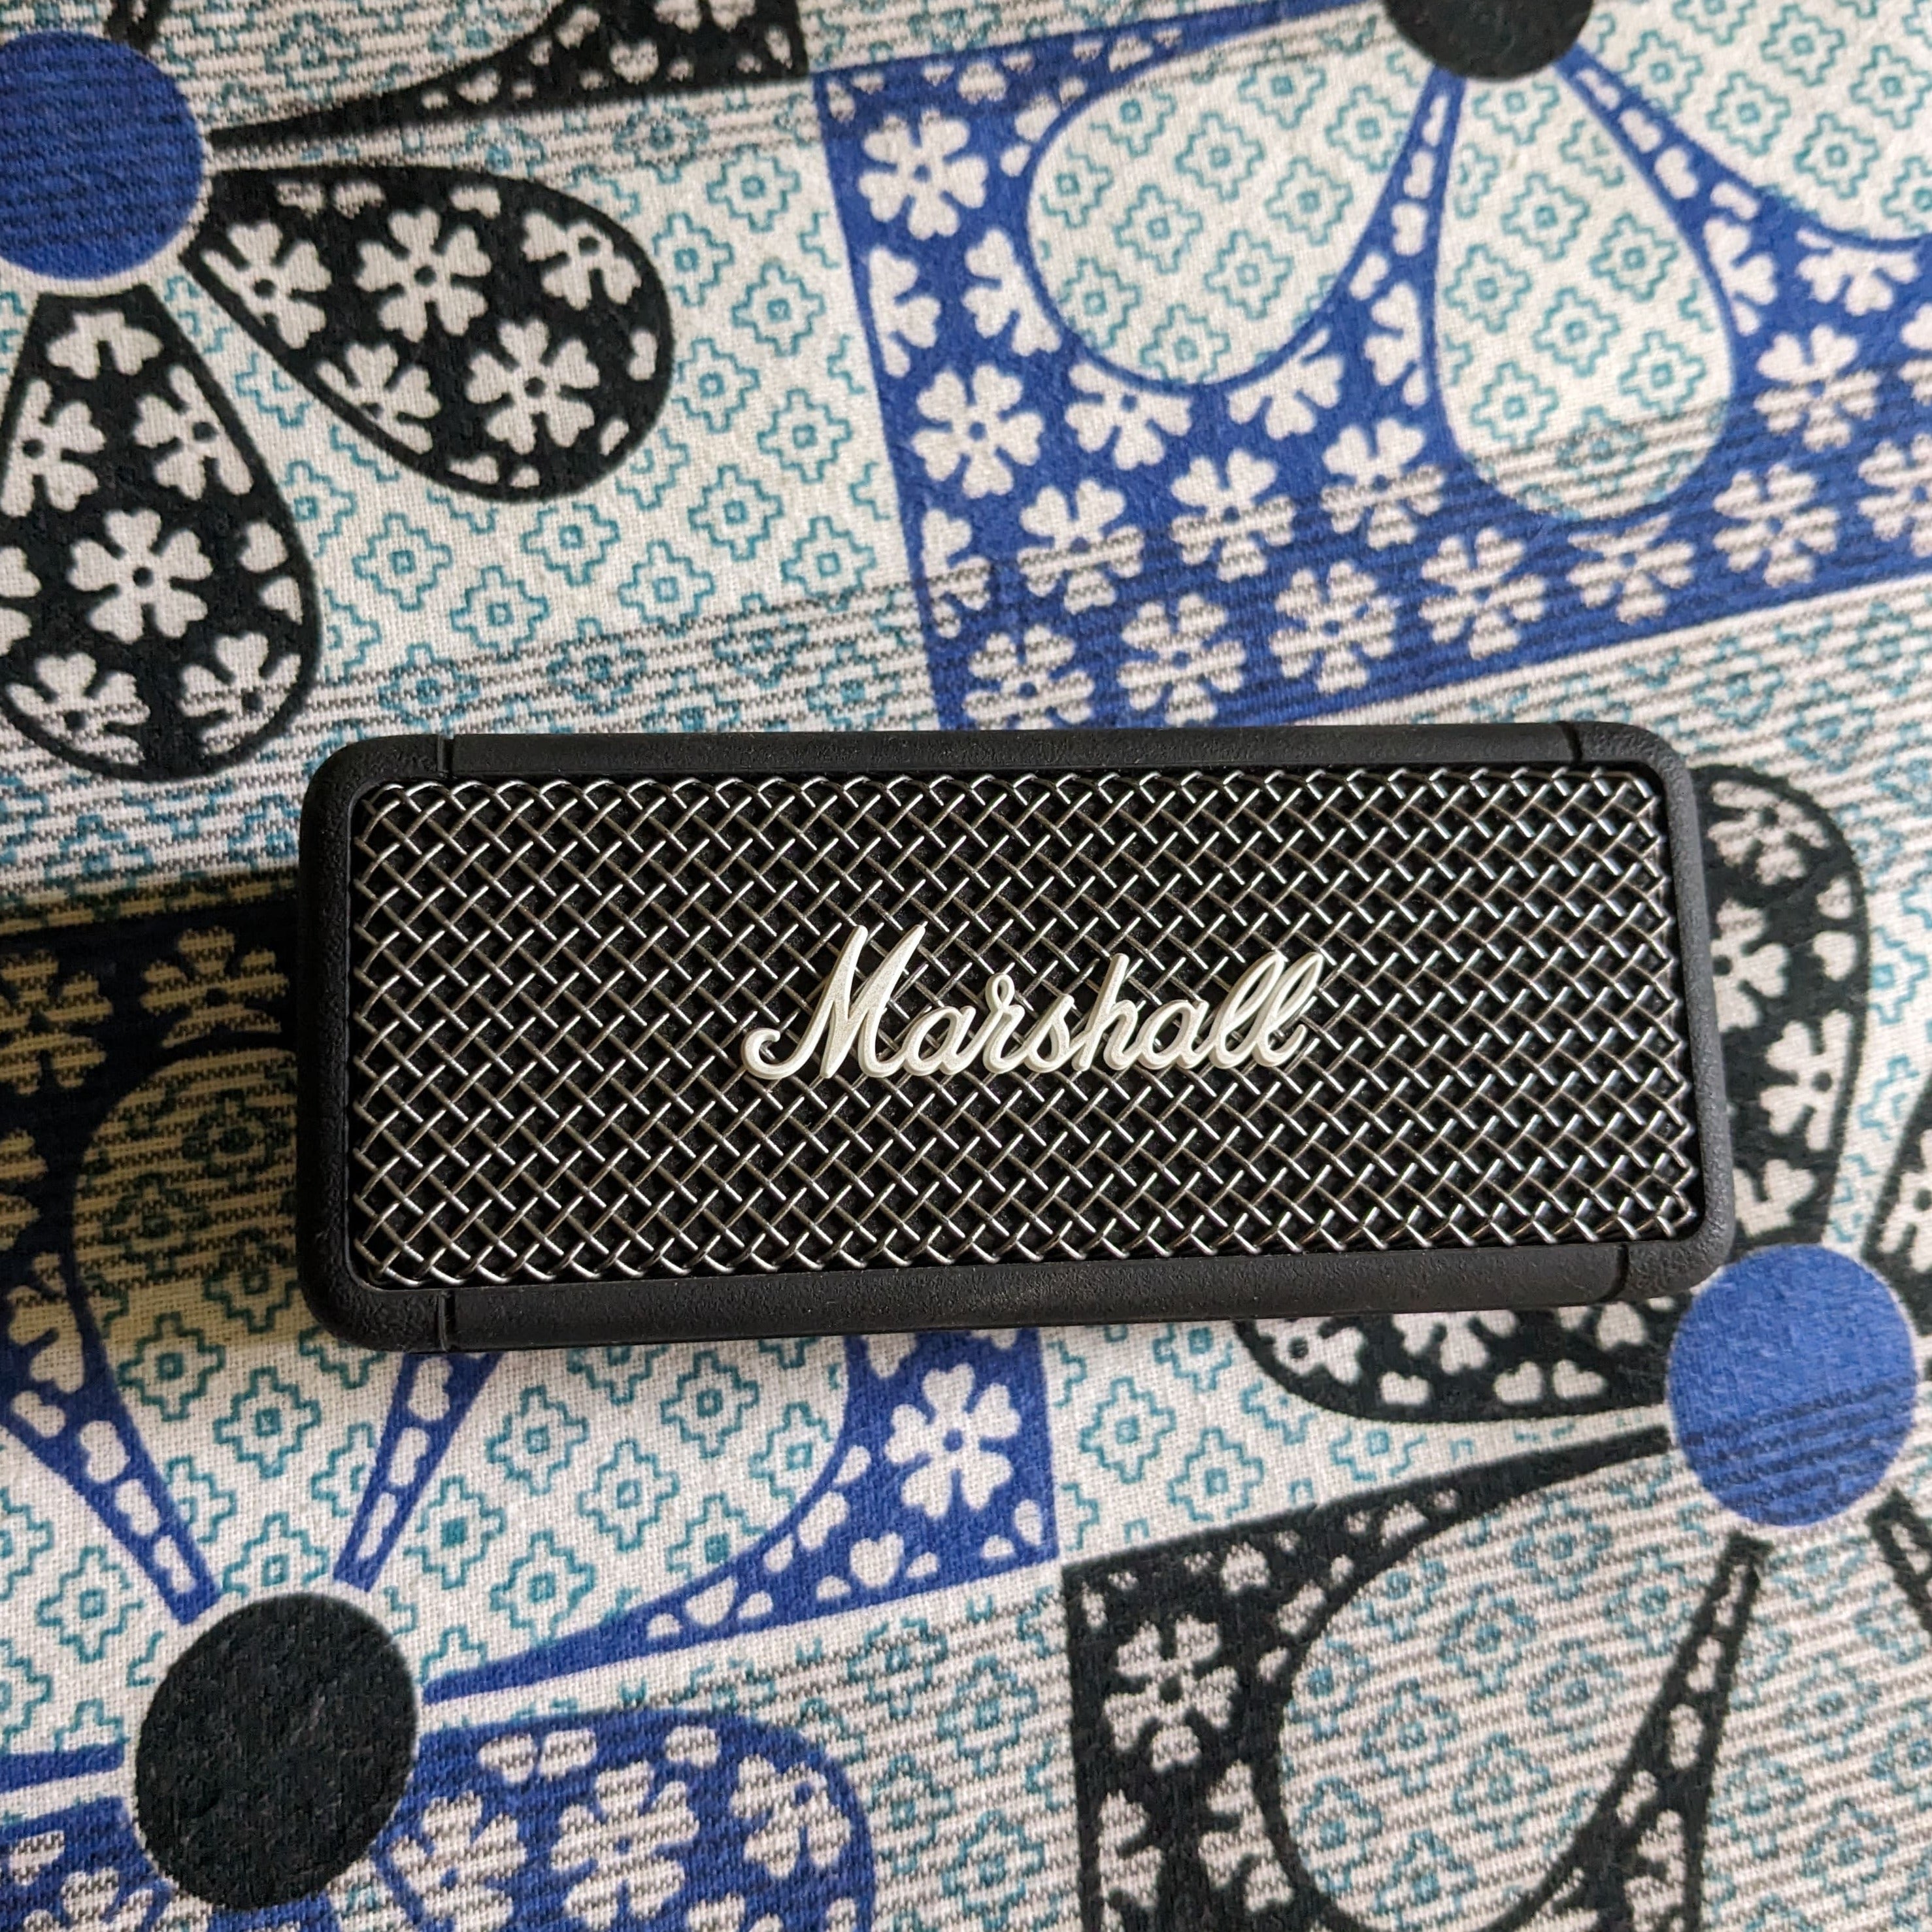 Marshall - Emberton (Pre-Owned)